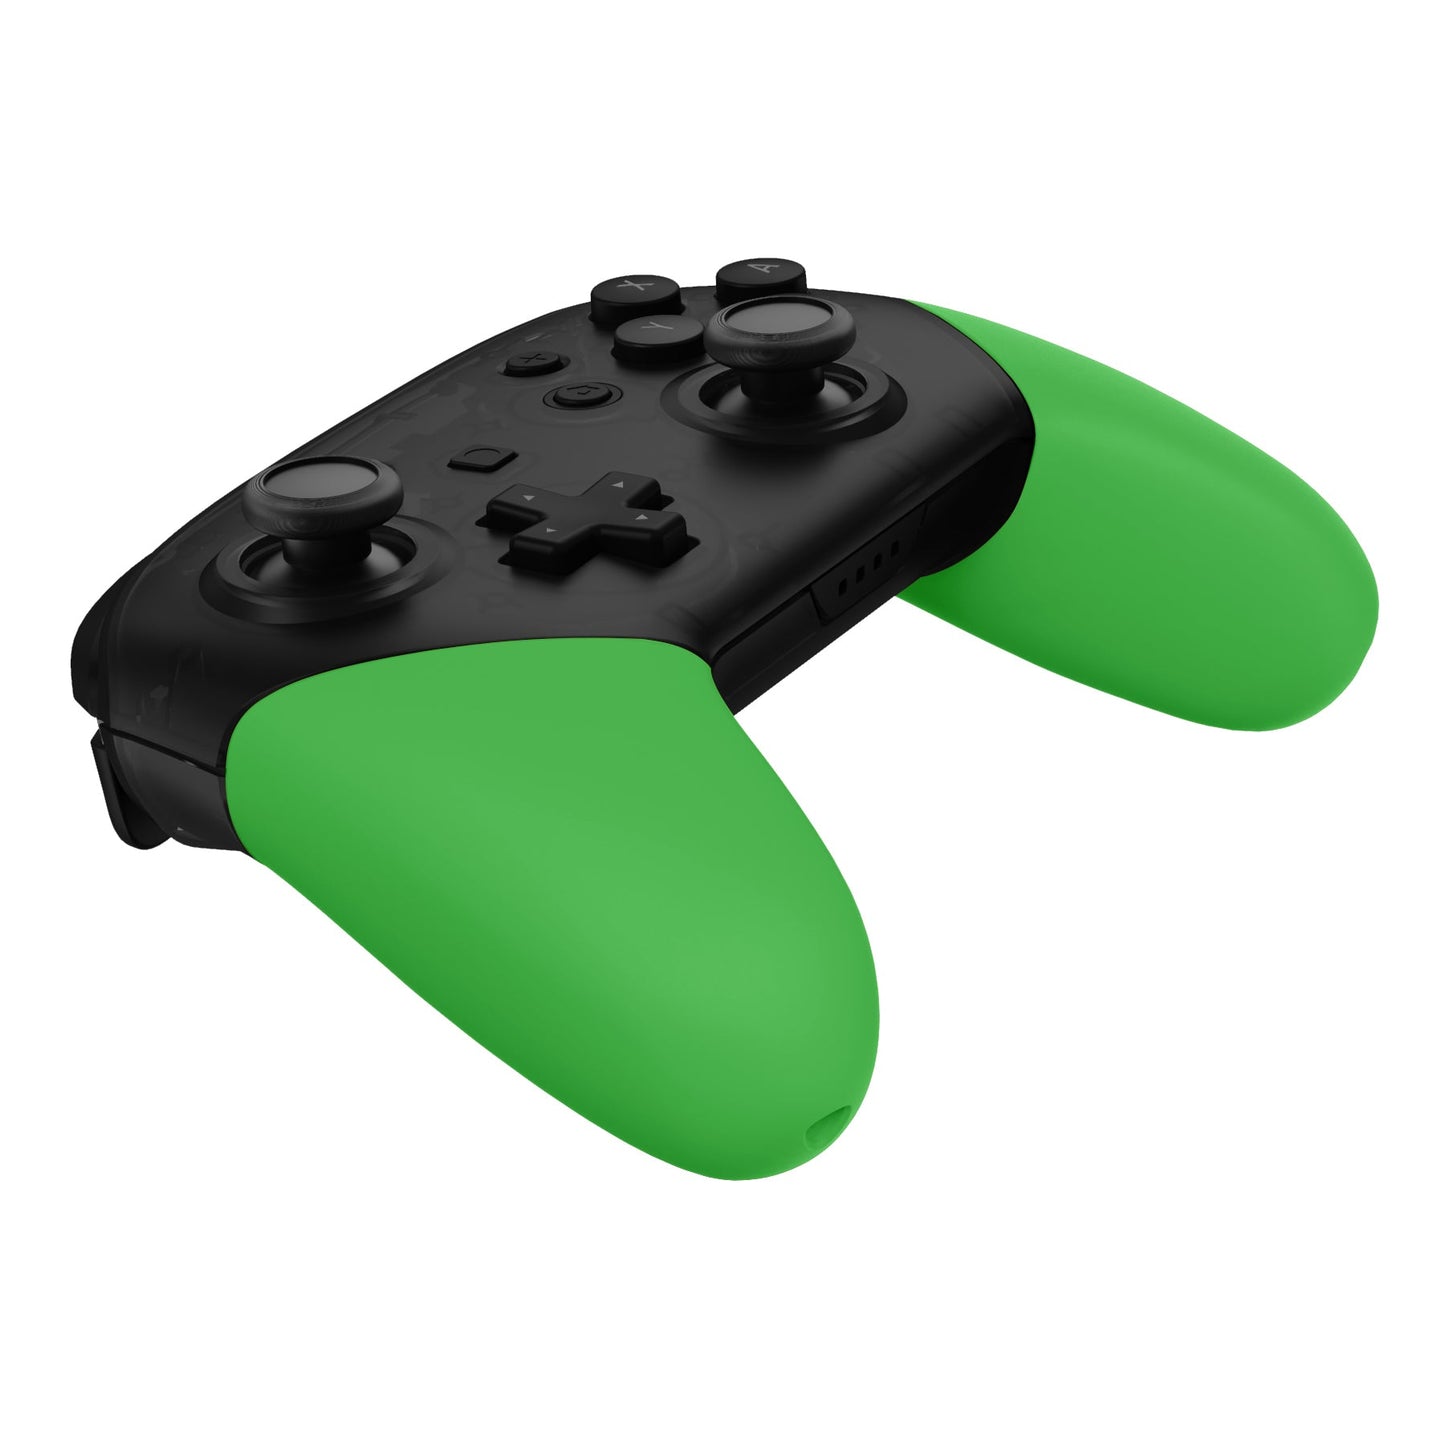 eXtremeRate Retail Green Replacement Handle Grips for NS Switch Pro Controller, Soft Touch DIY Hand Grip Shell for NS Switch Pro Controller - Controller NOT Included - GRP317